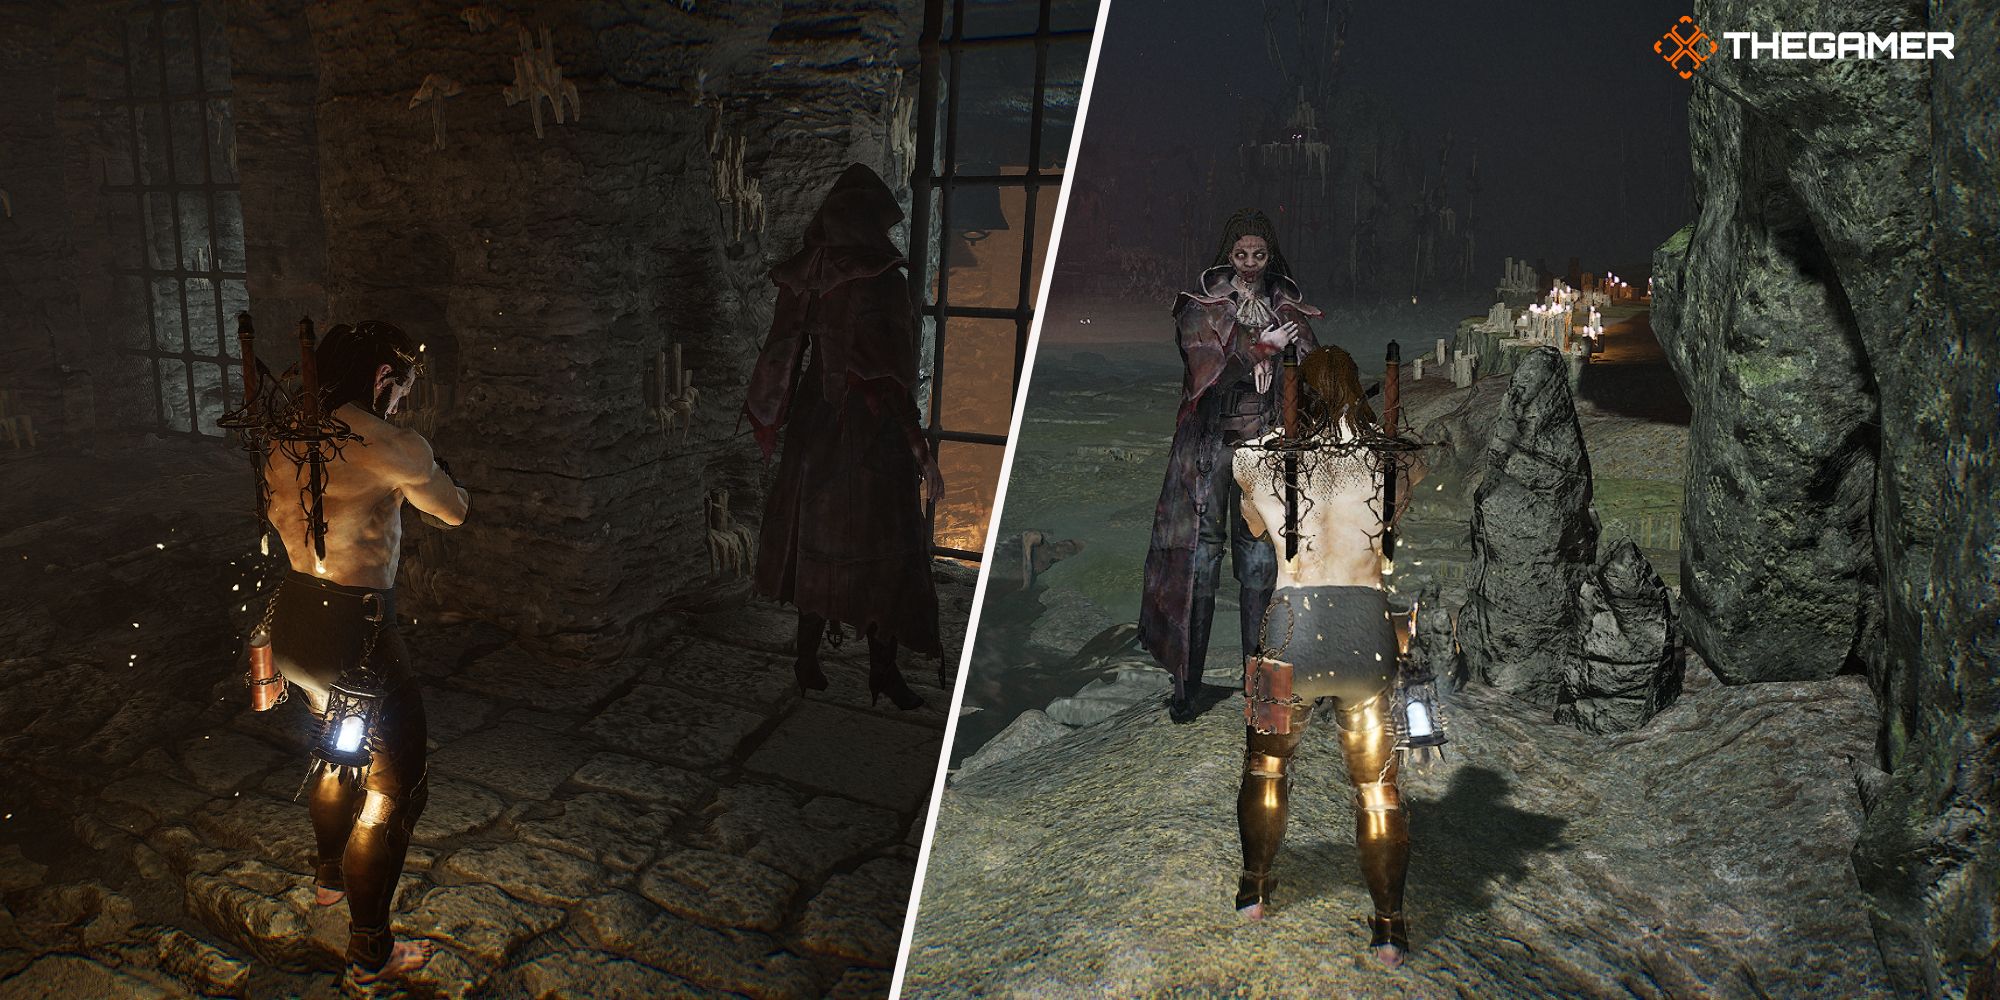 Right: Player standing next to Damarose at the Shrine of Adyr - Left: Player standing next to Damarose at Pilgrim's Perch Lords of the Fallen